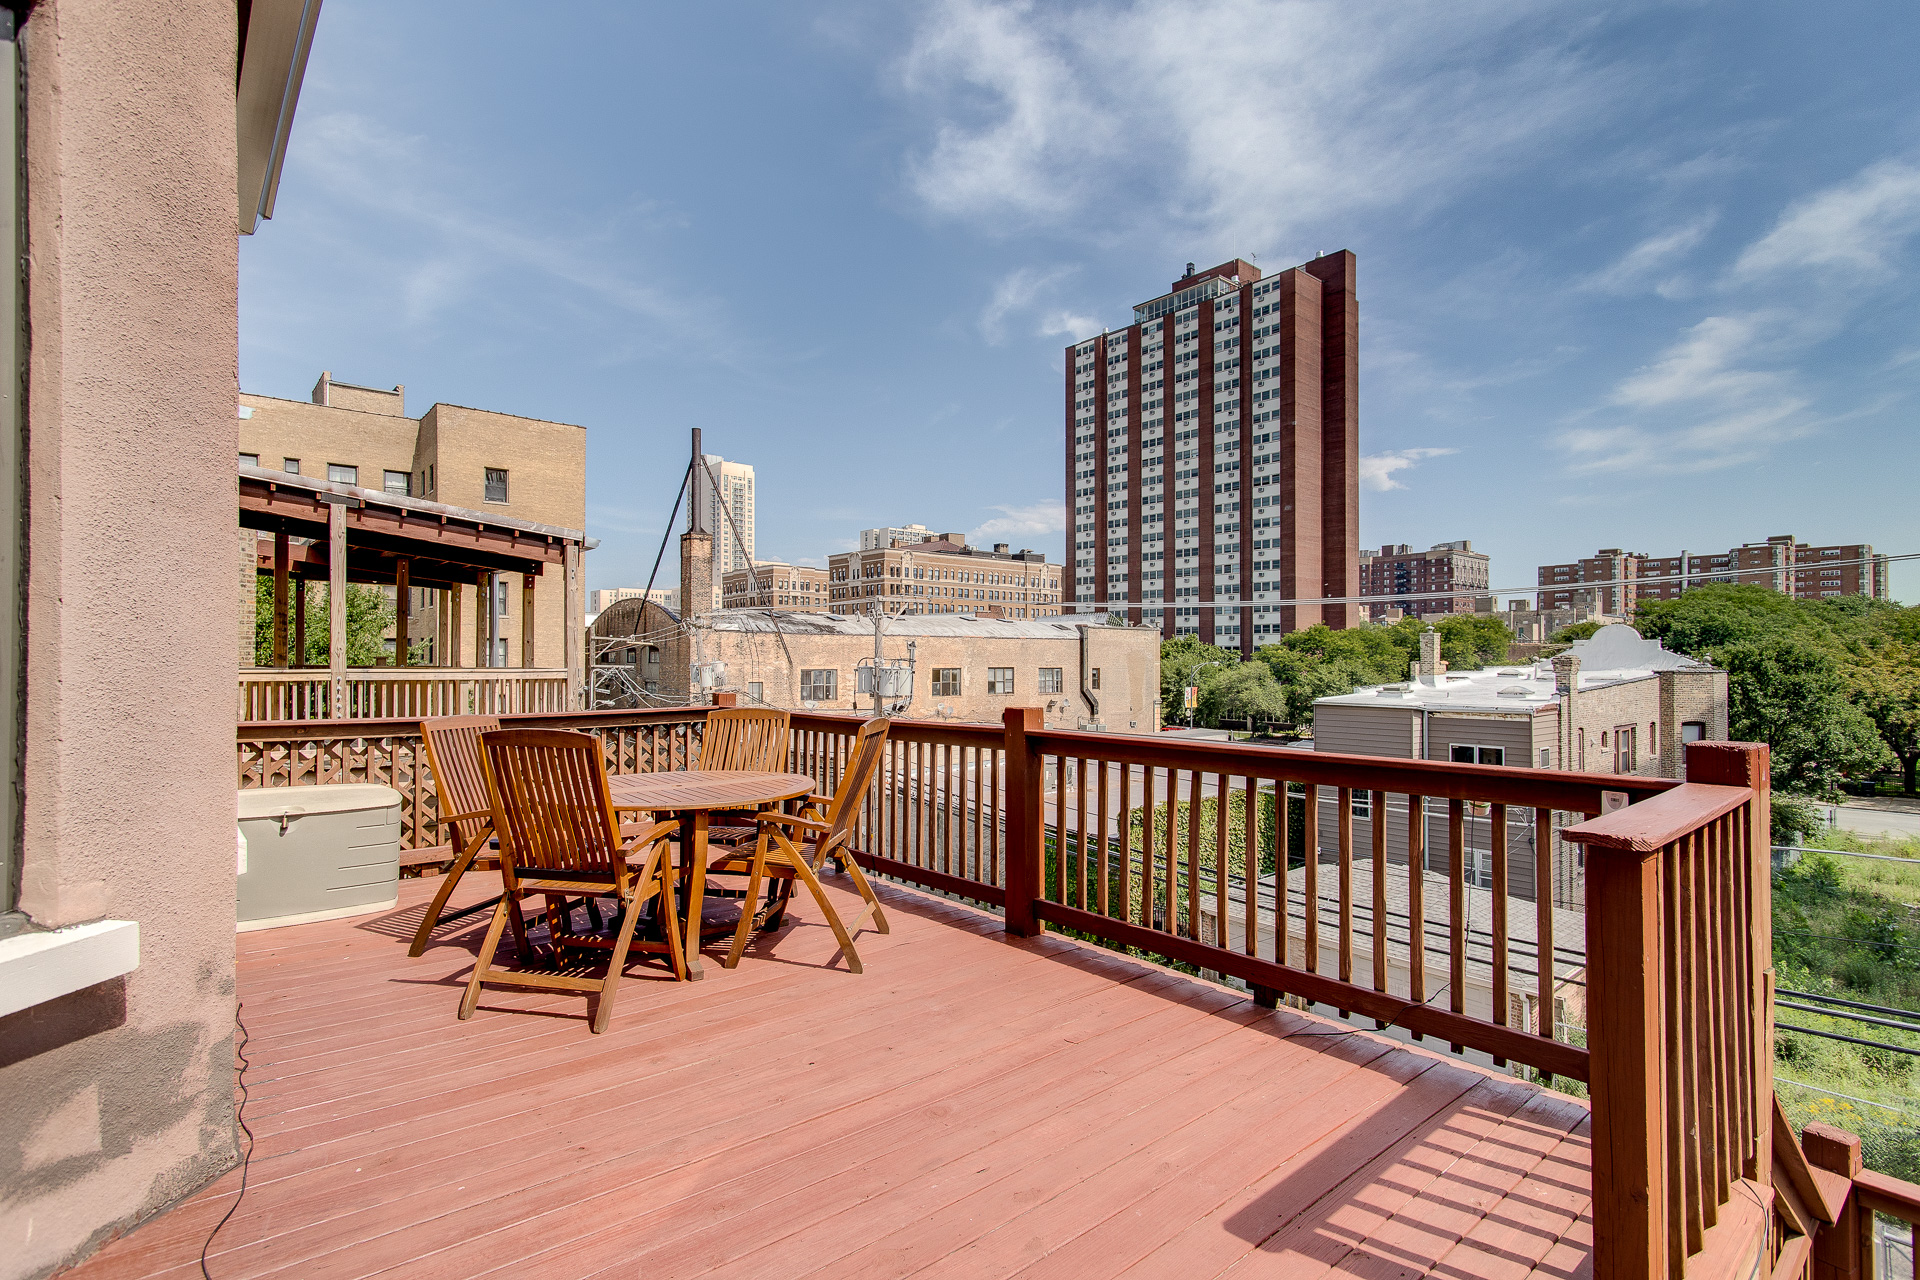 4923 N. Kenmore Ave. Unit 3 Chicago,IL